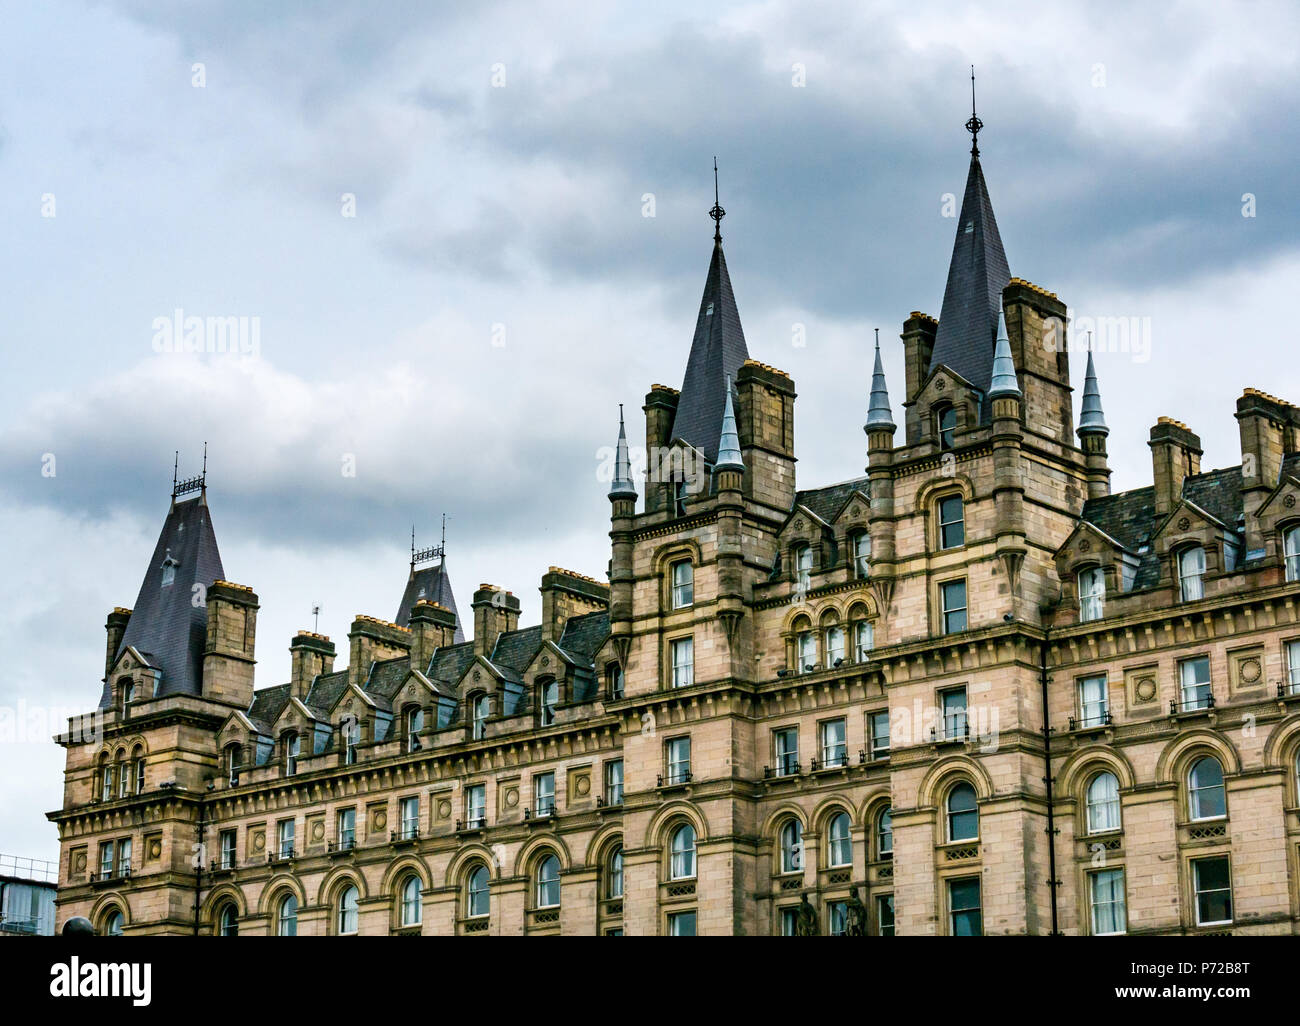 Victorian Gothic style North Western Hotel by Alfred Waterhouse, Liverpool Lime Street, England, UK Stock Photo